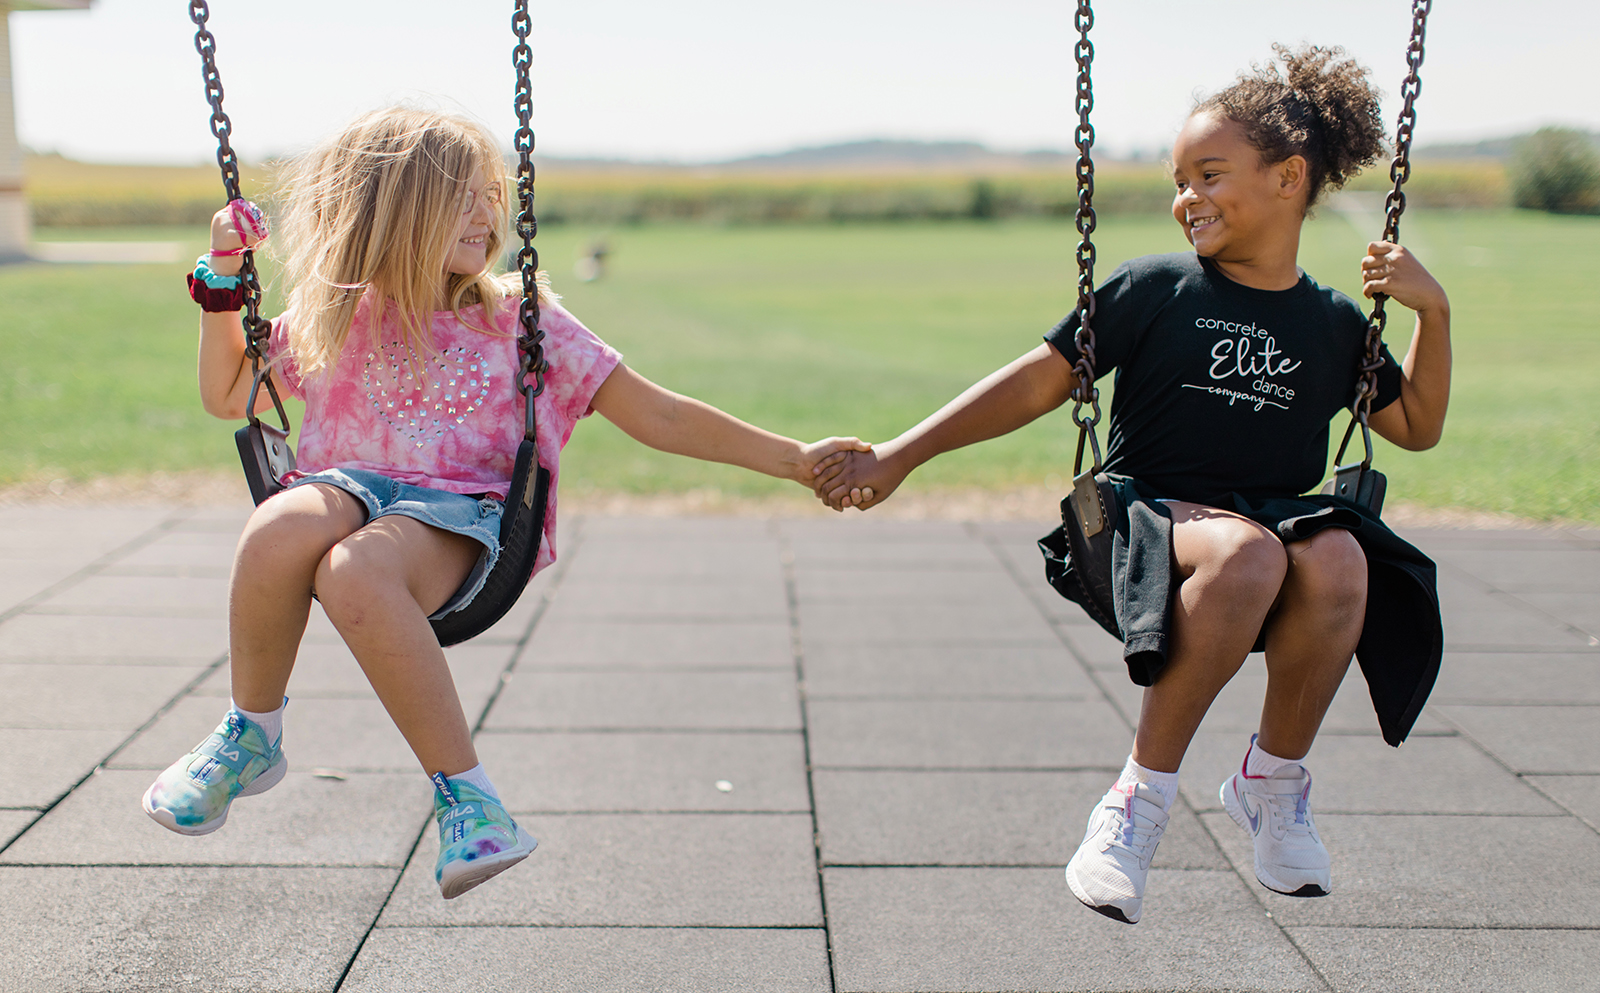 Two students hold hands while on a swingset at recess